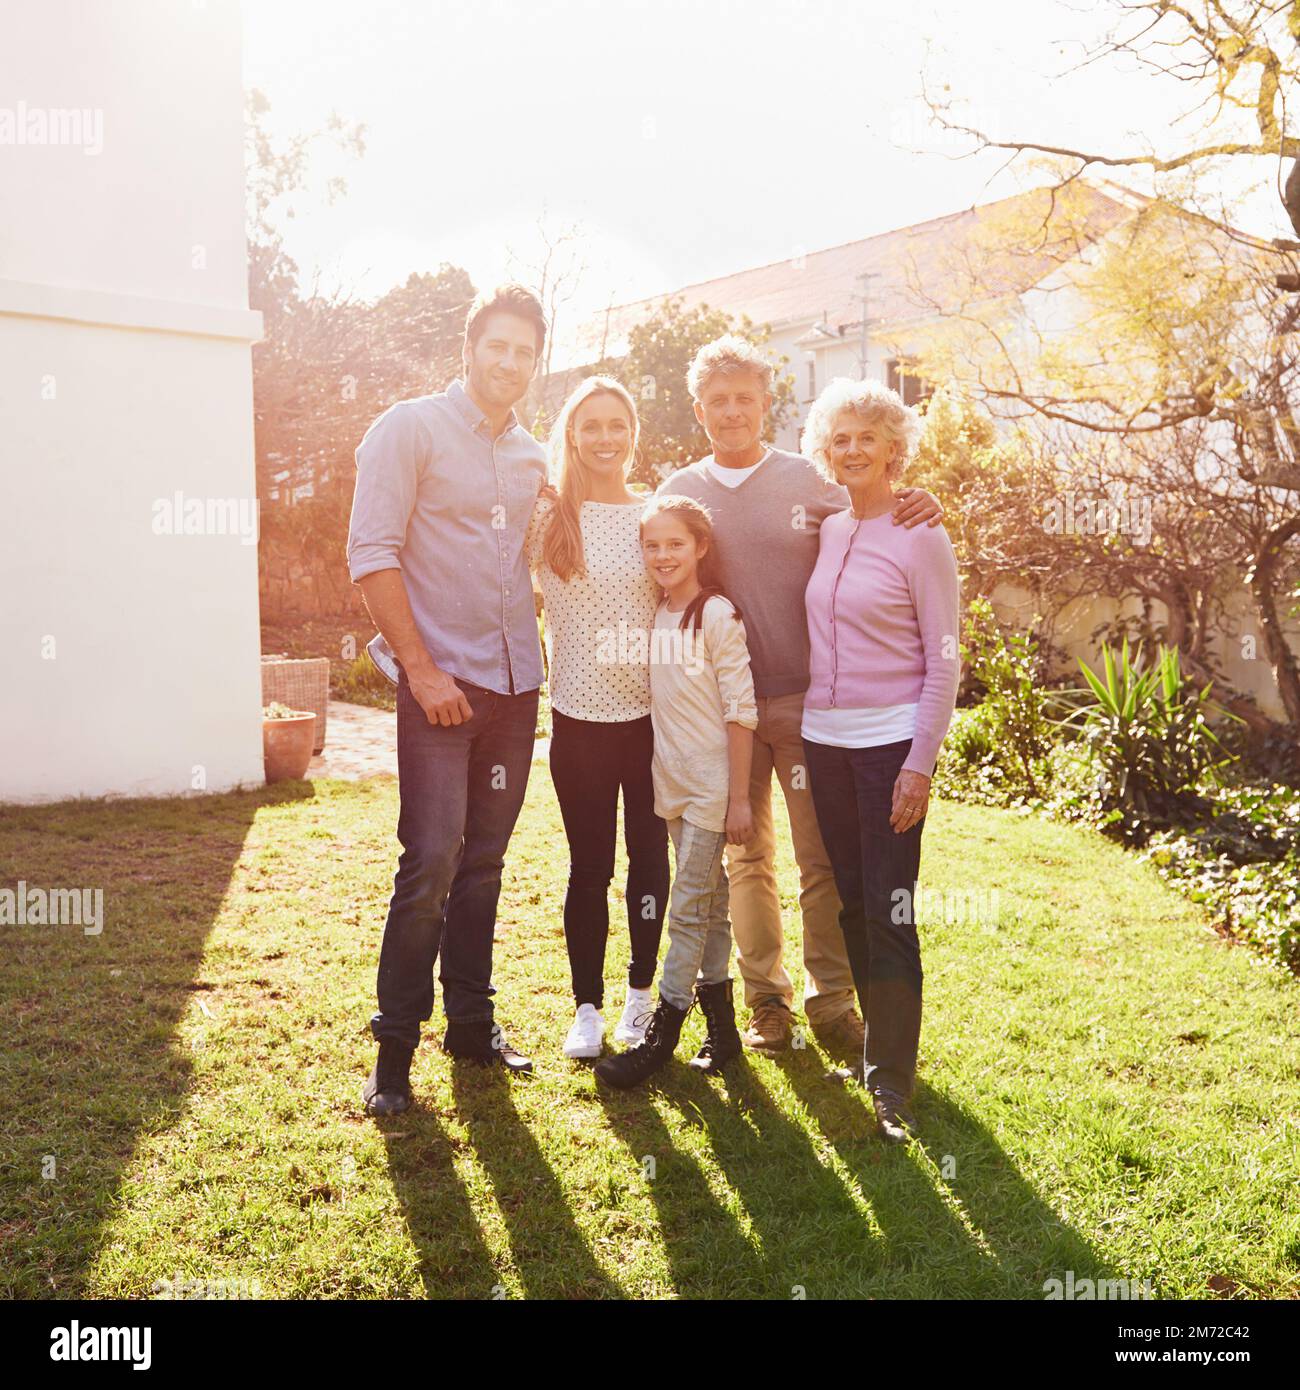 They stick together like glue. A full length portrait of a happy multi-generation family standing outdoors. Stock Photo